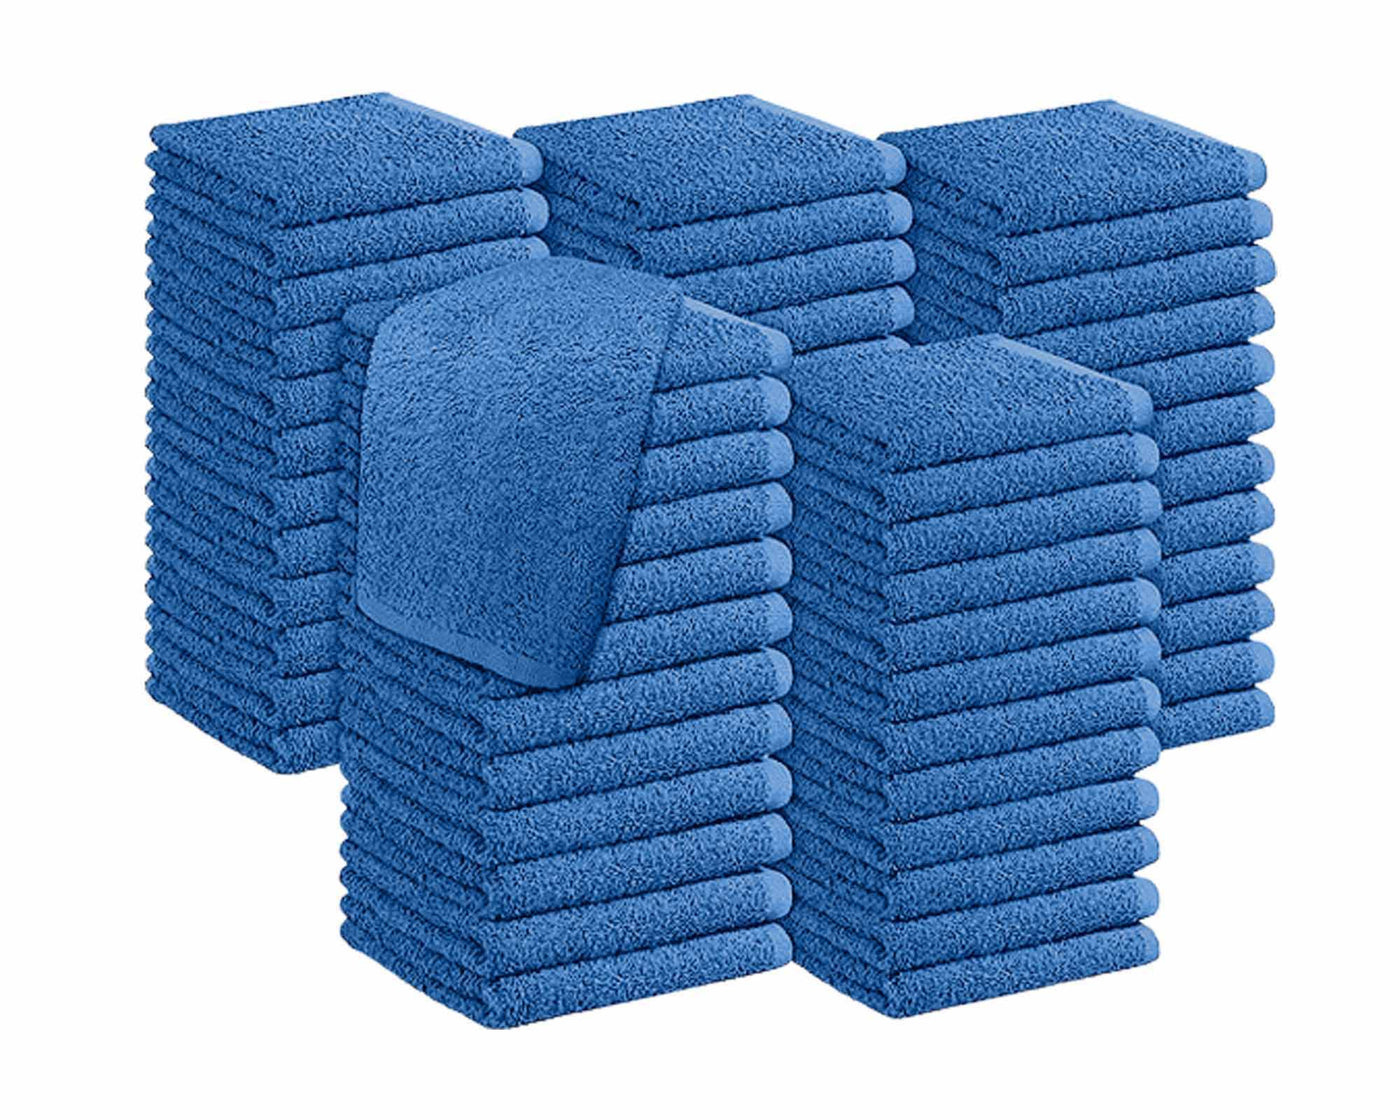 60 pack of elegance face cloth in mid blue colour #colour_mid-blue